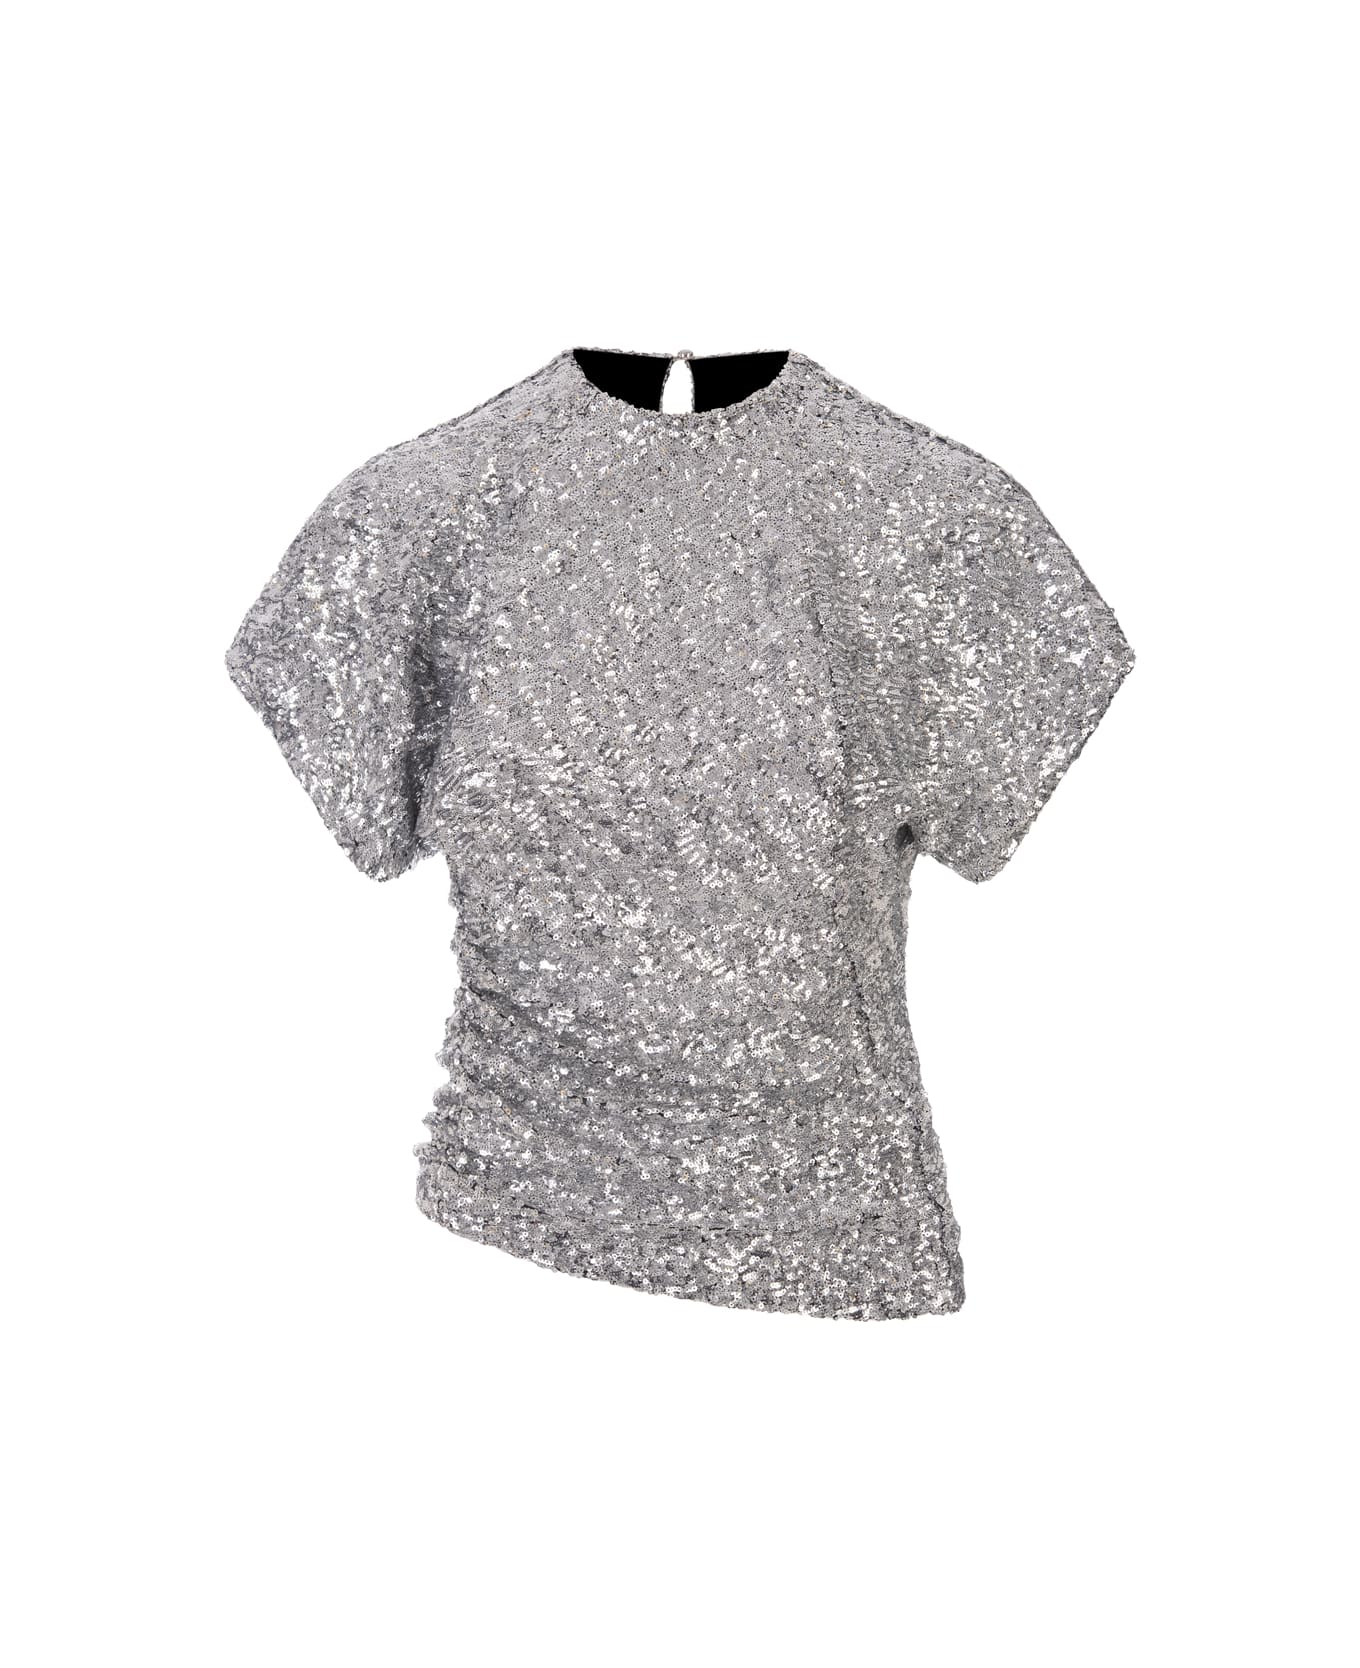 Paco Rabanne Silver Asymmetrical Top With Sequins - Silver